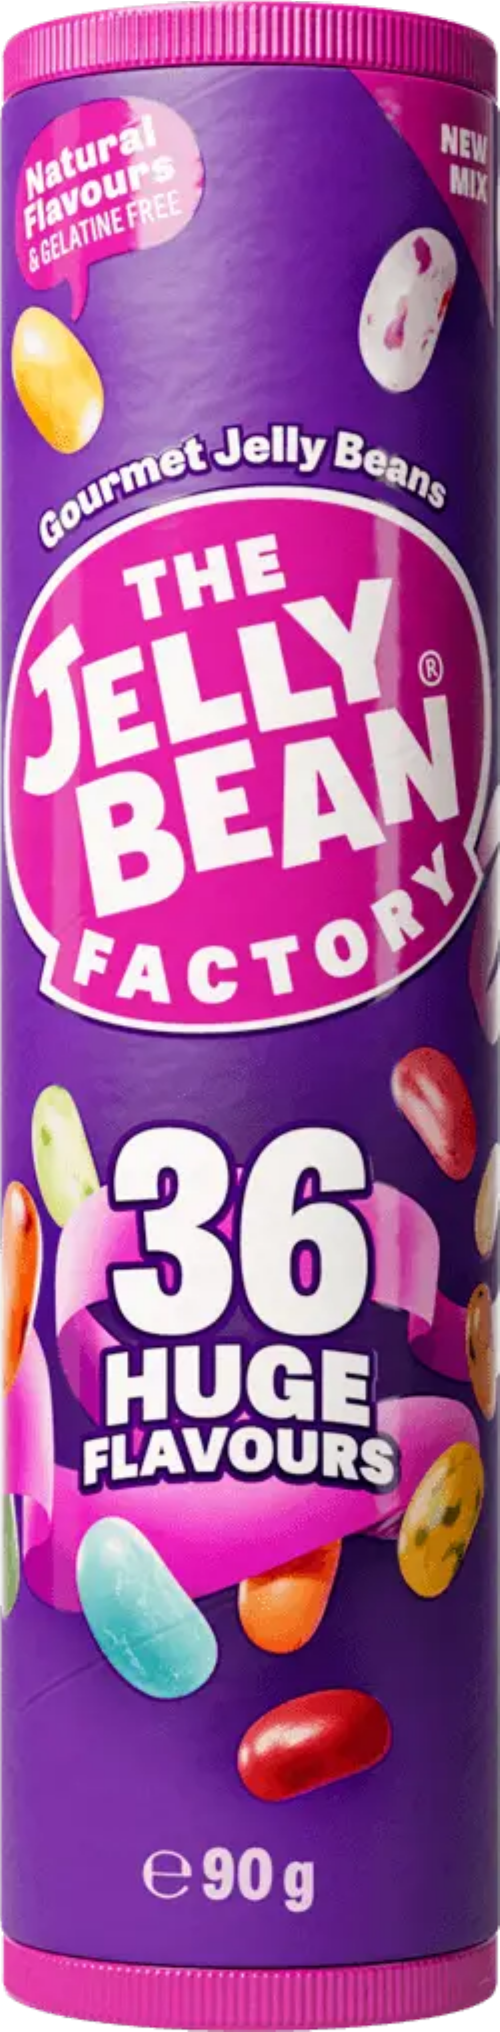 JELLY BEAN FACTORY 36 Huge Flavours Mix - Tube 90g